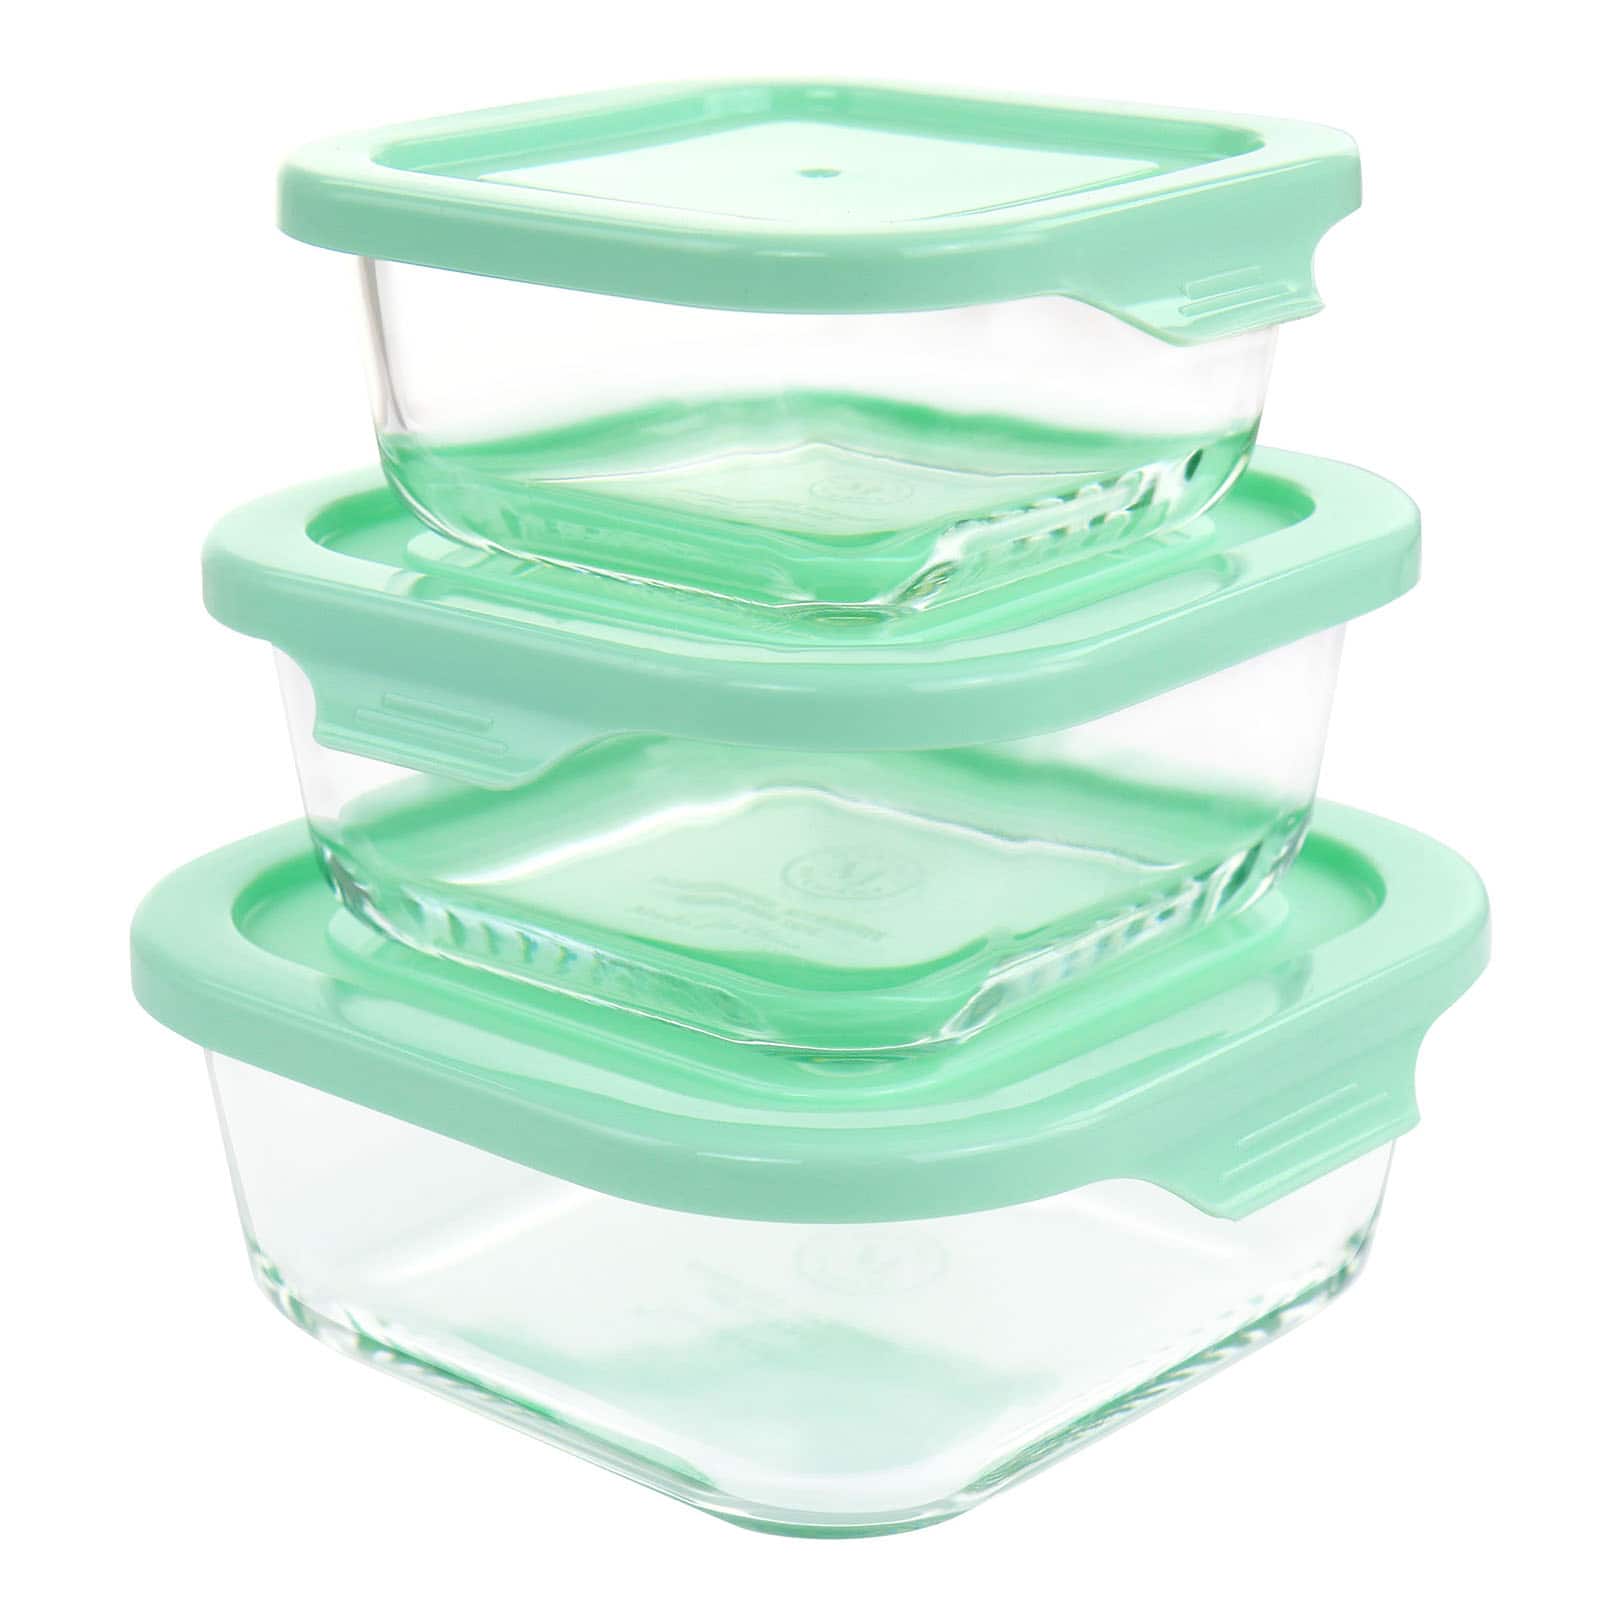 OXO Food Storage Containers Are 20% Off, Plus More Kitchen Deals Today